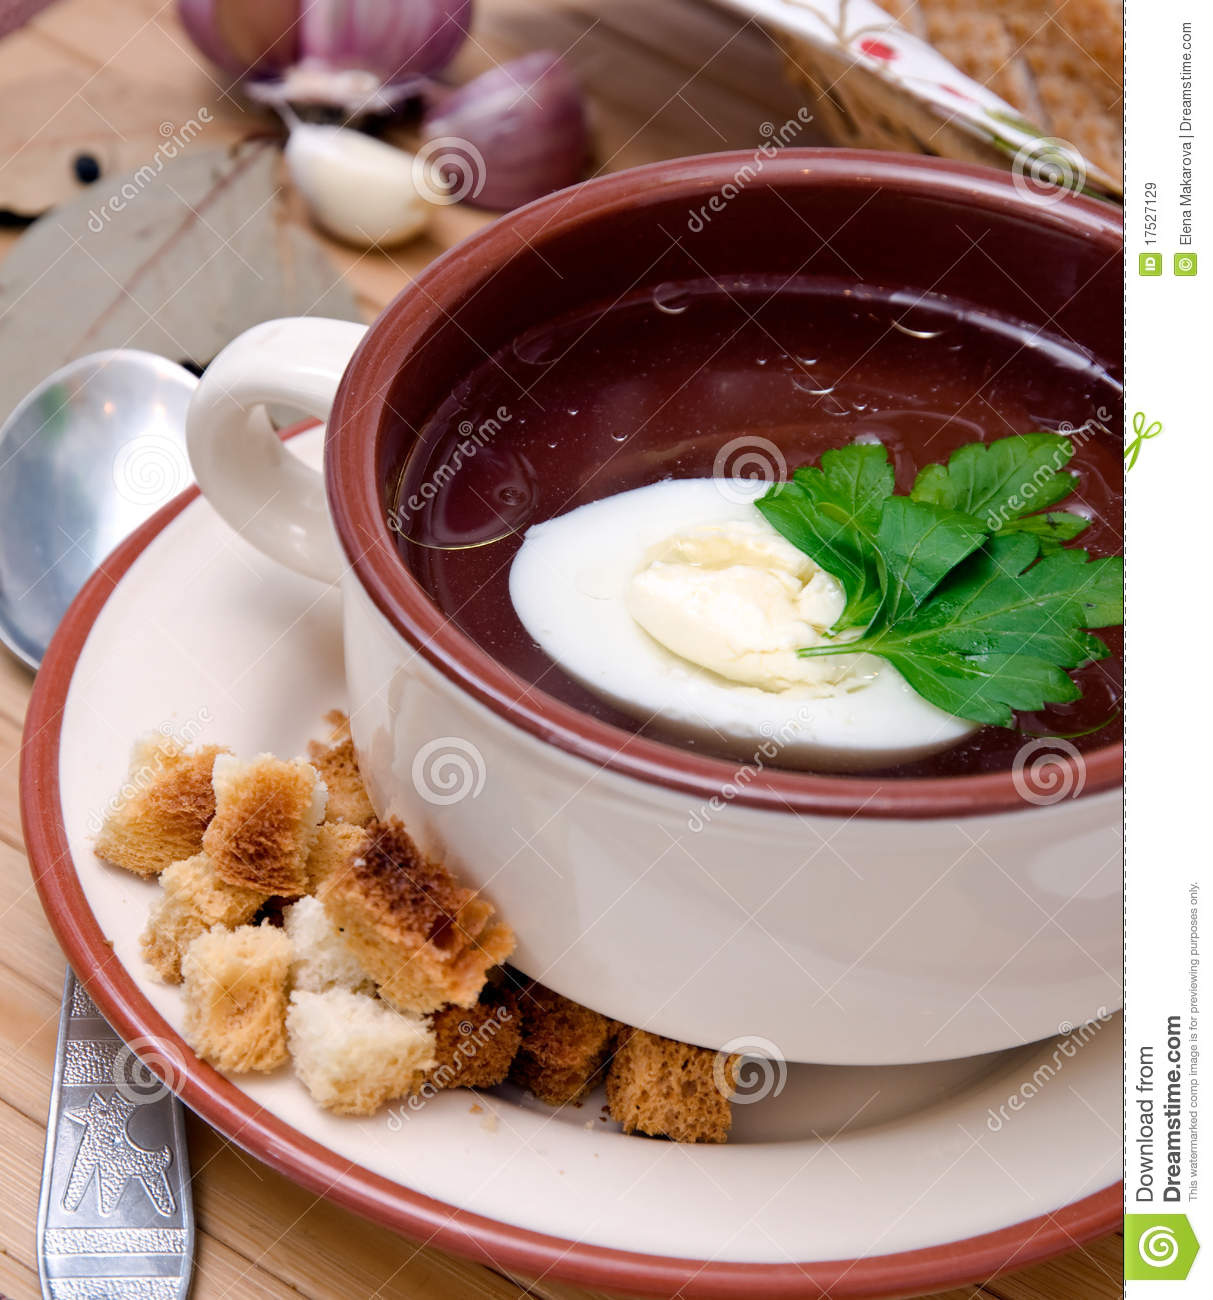 Chicken Broth Royalty Free Stock Images   Image  17527129